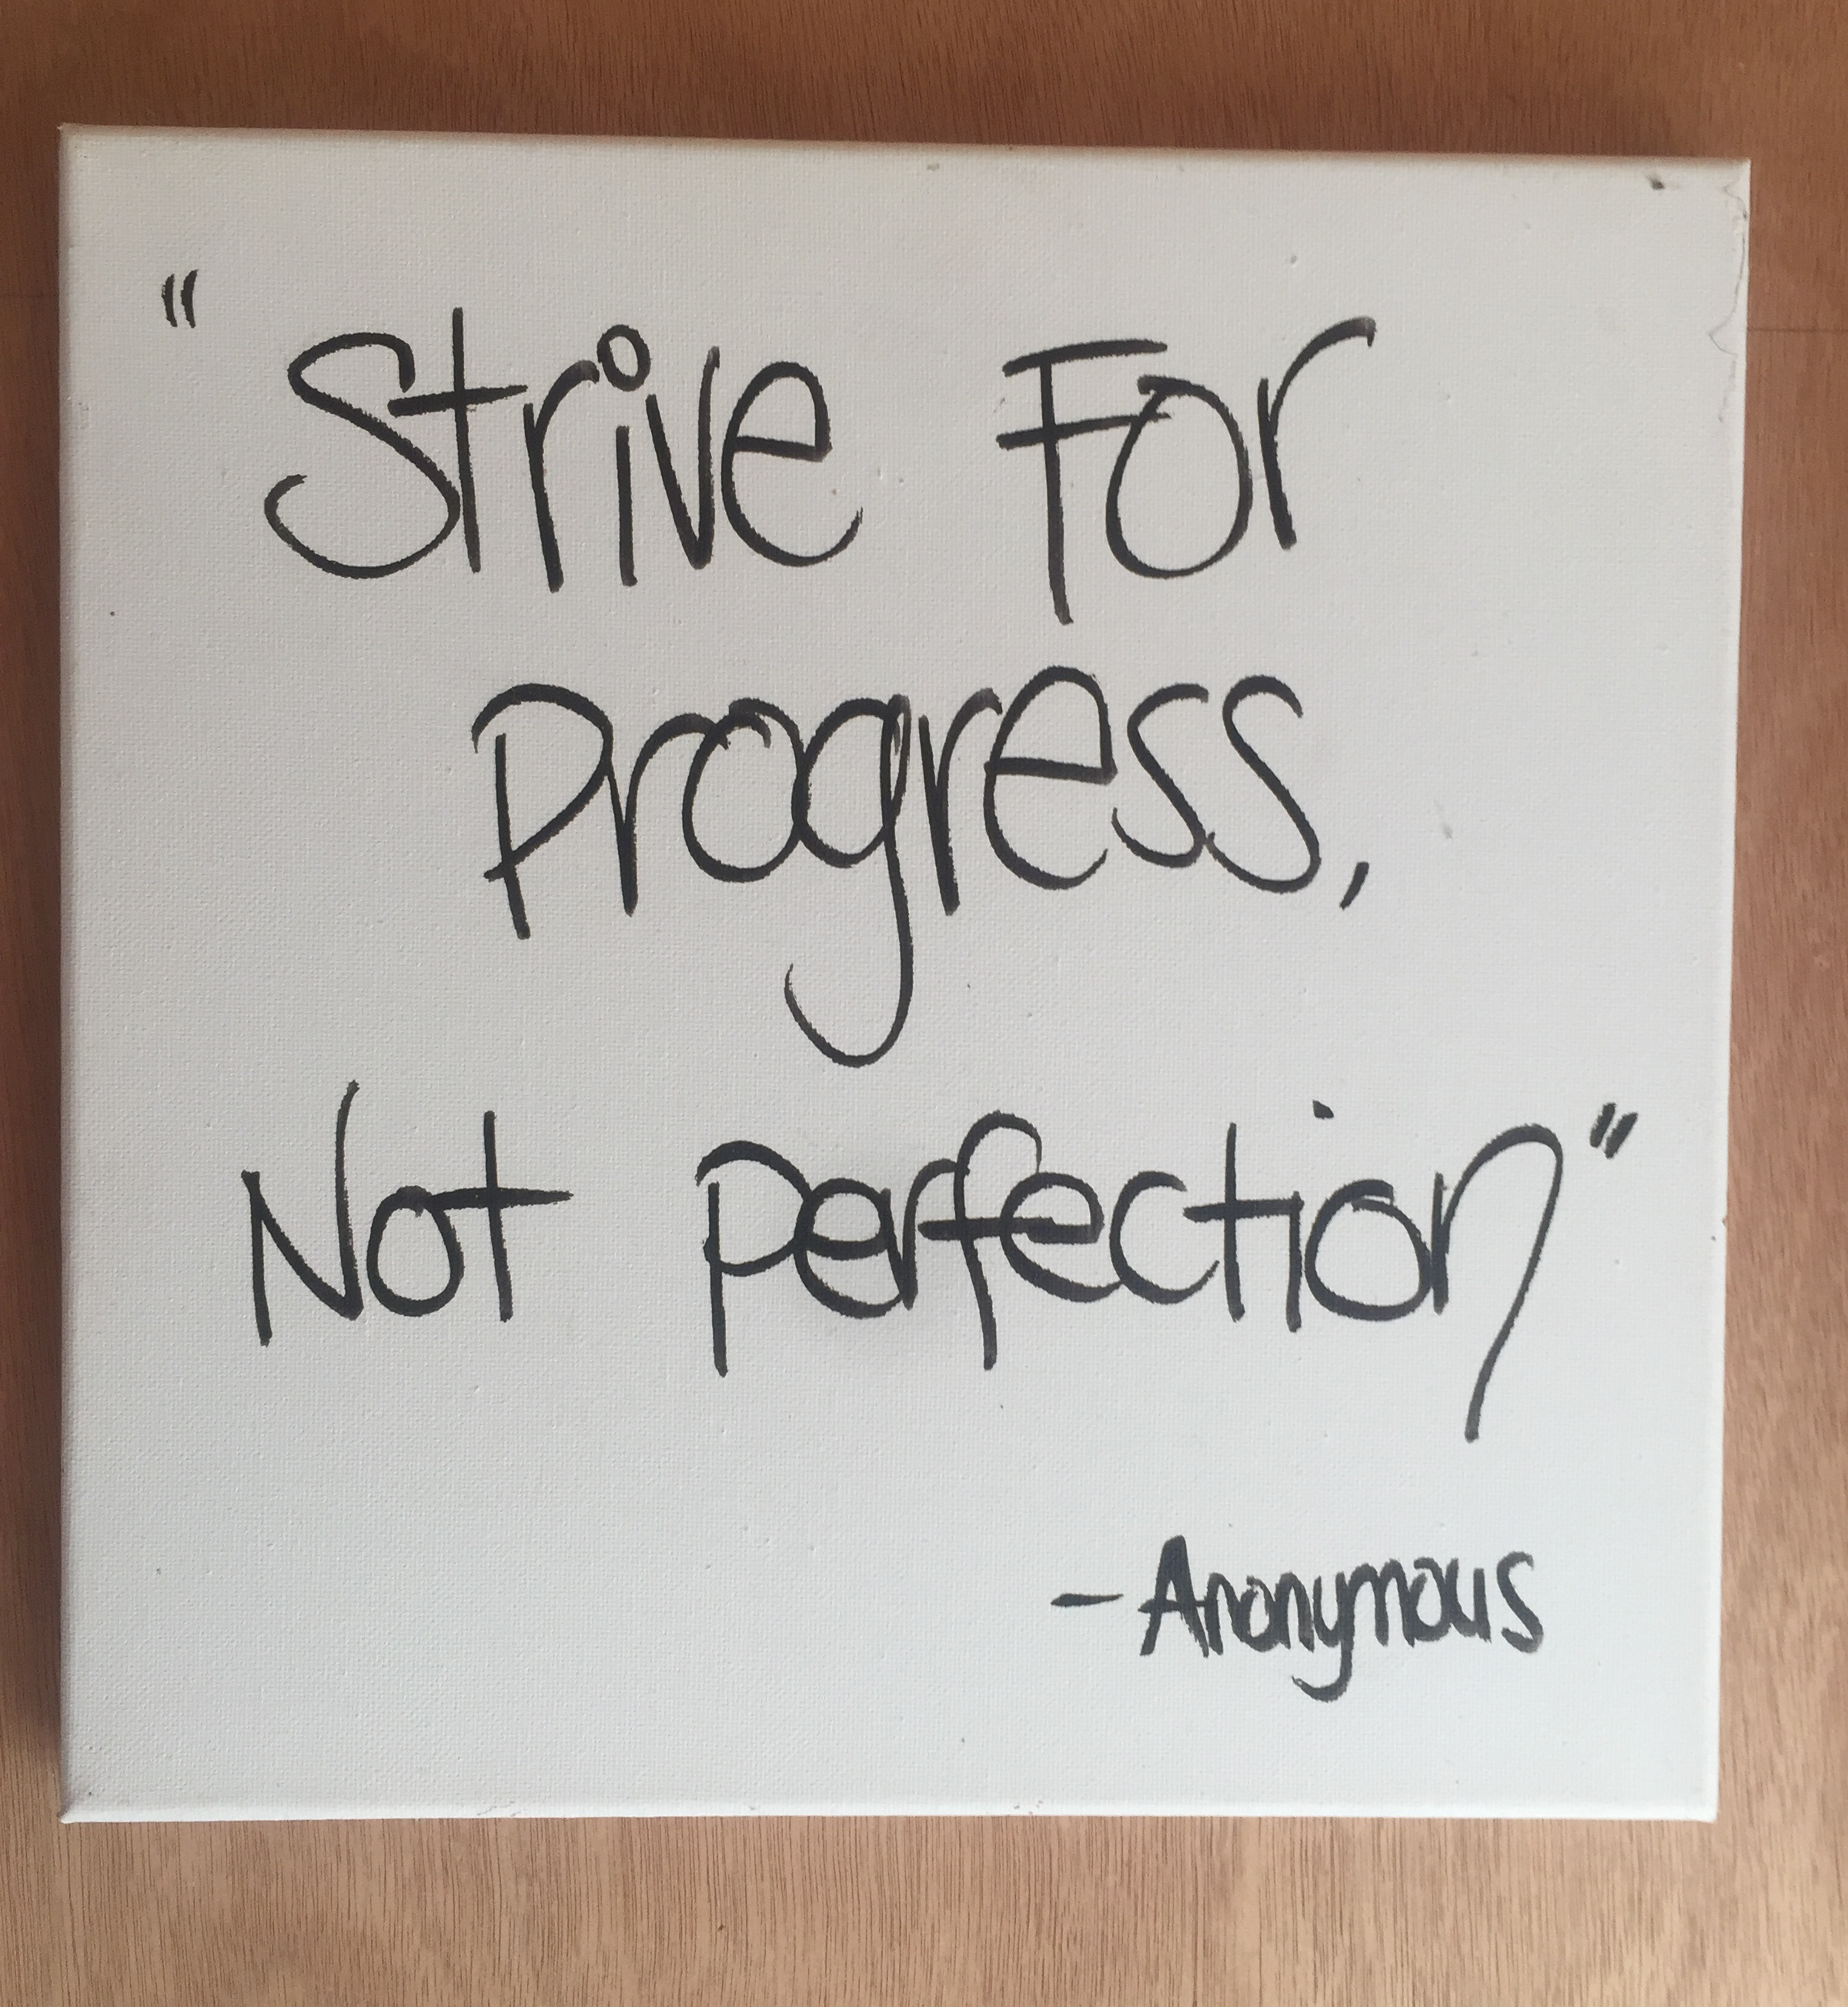 strive for progress, not perfection